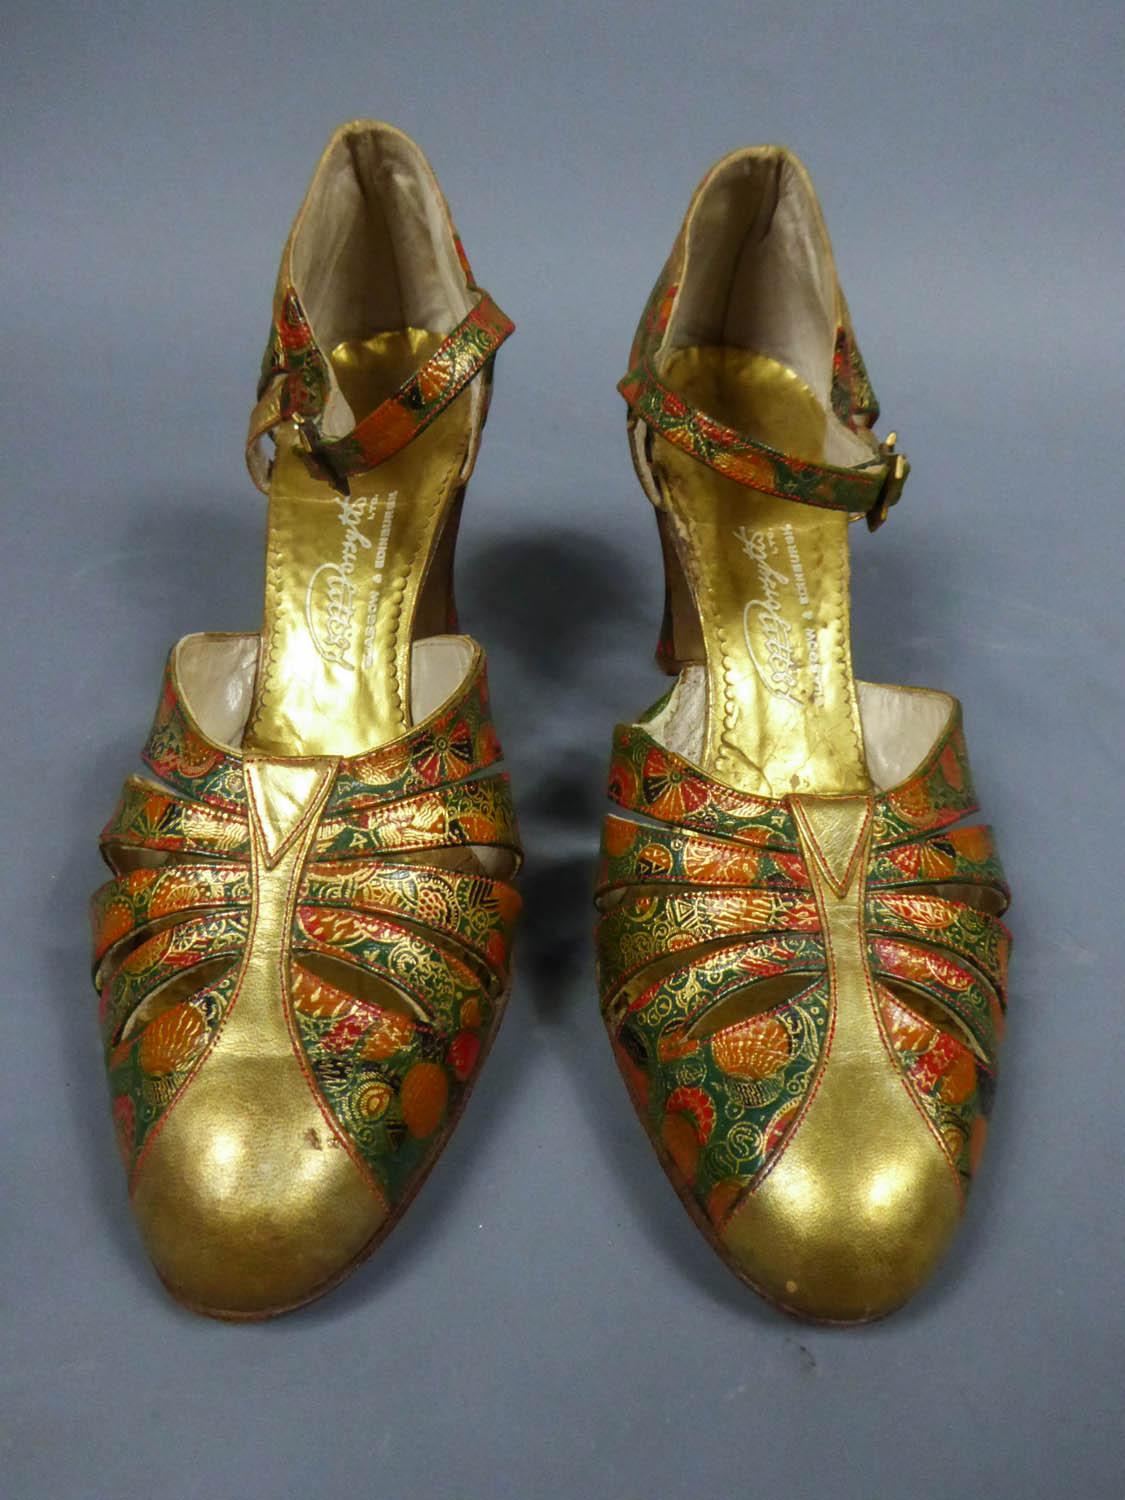 Circa 1930
Scotland

Heels or pair of T-bar shoes Salome for the ball dating from the Belle Epoque and Scottish origin. Printed and engraved leather with green, red, gold and black Art Deco pattern. Appliqués of golden leather. Gold and engraved